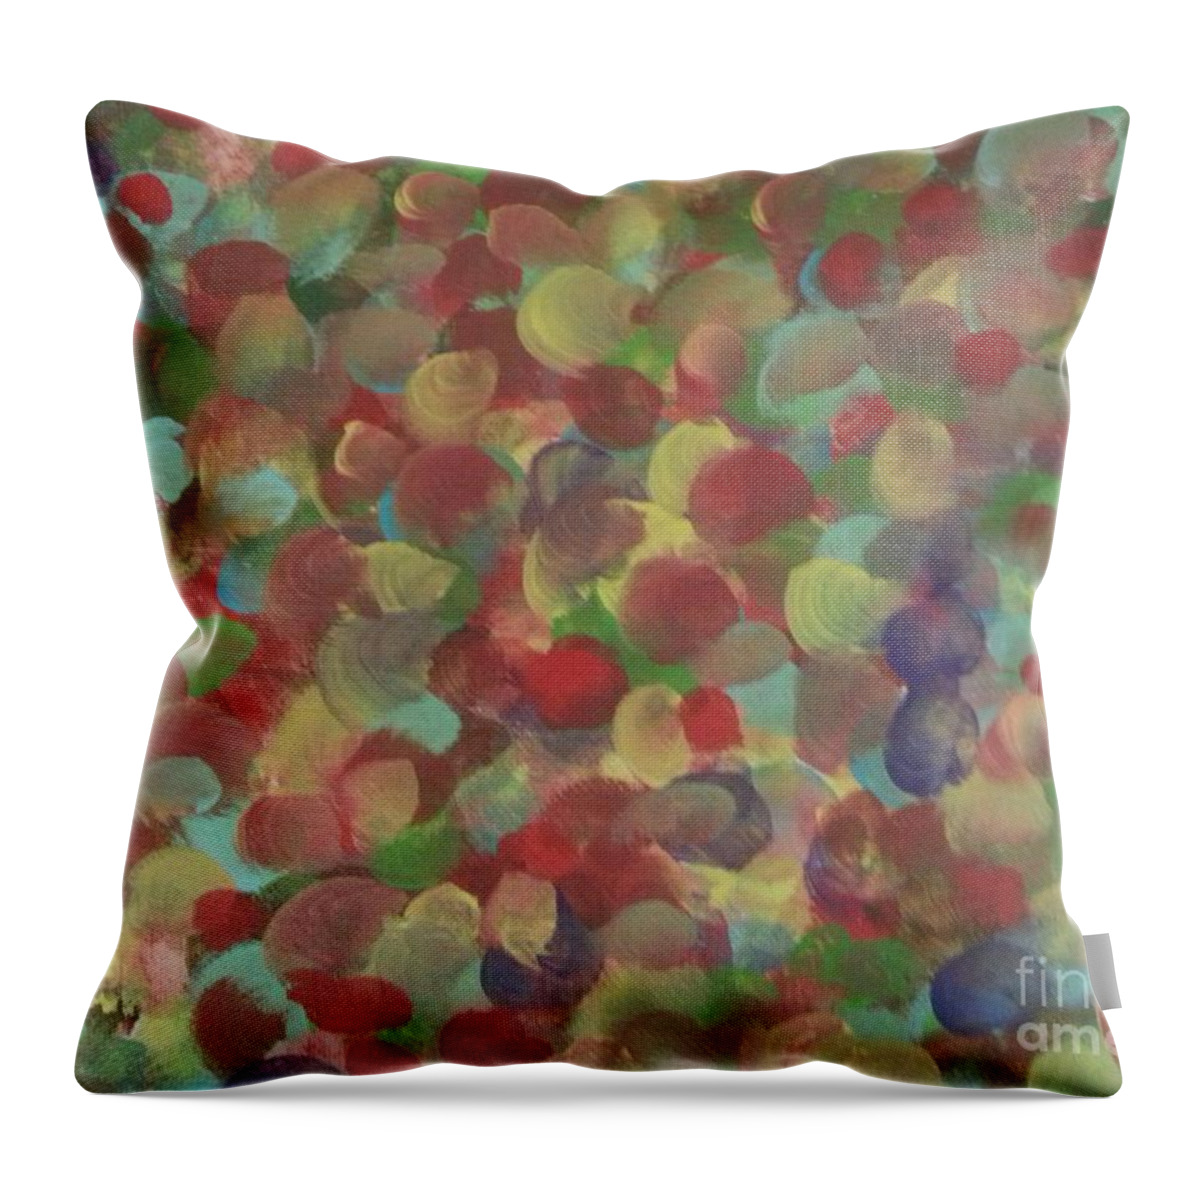 End-of-the-day Throw Pillow featuring the painting Relaxing by Elizabeth Mauldin